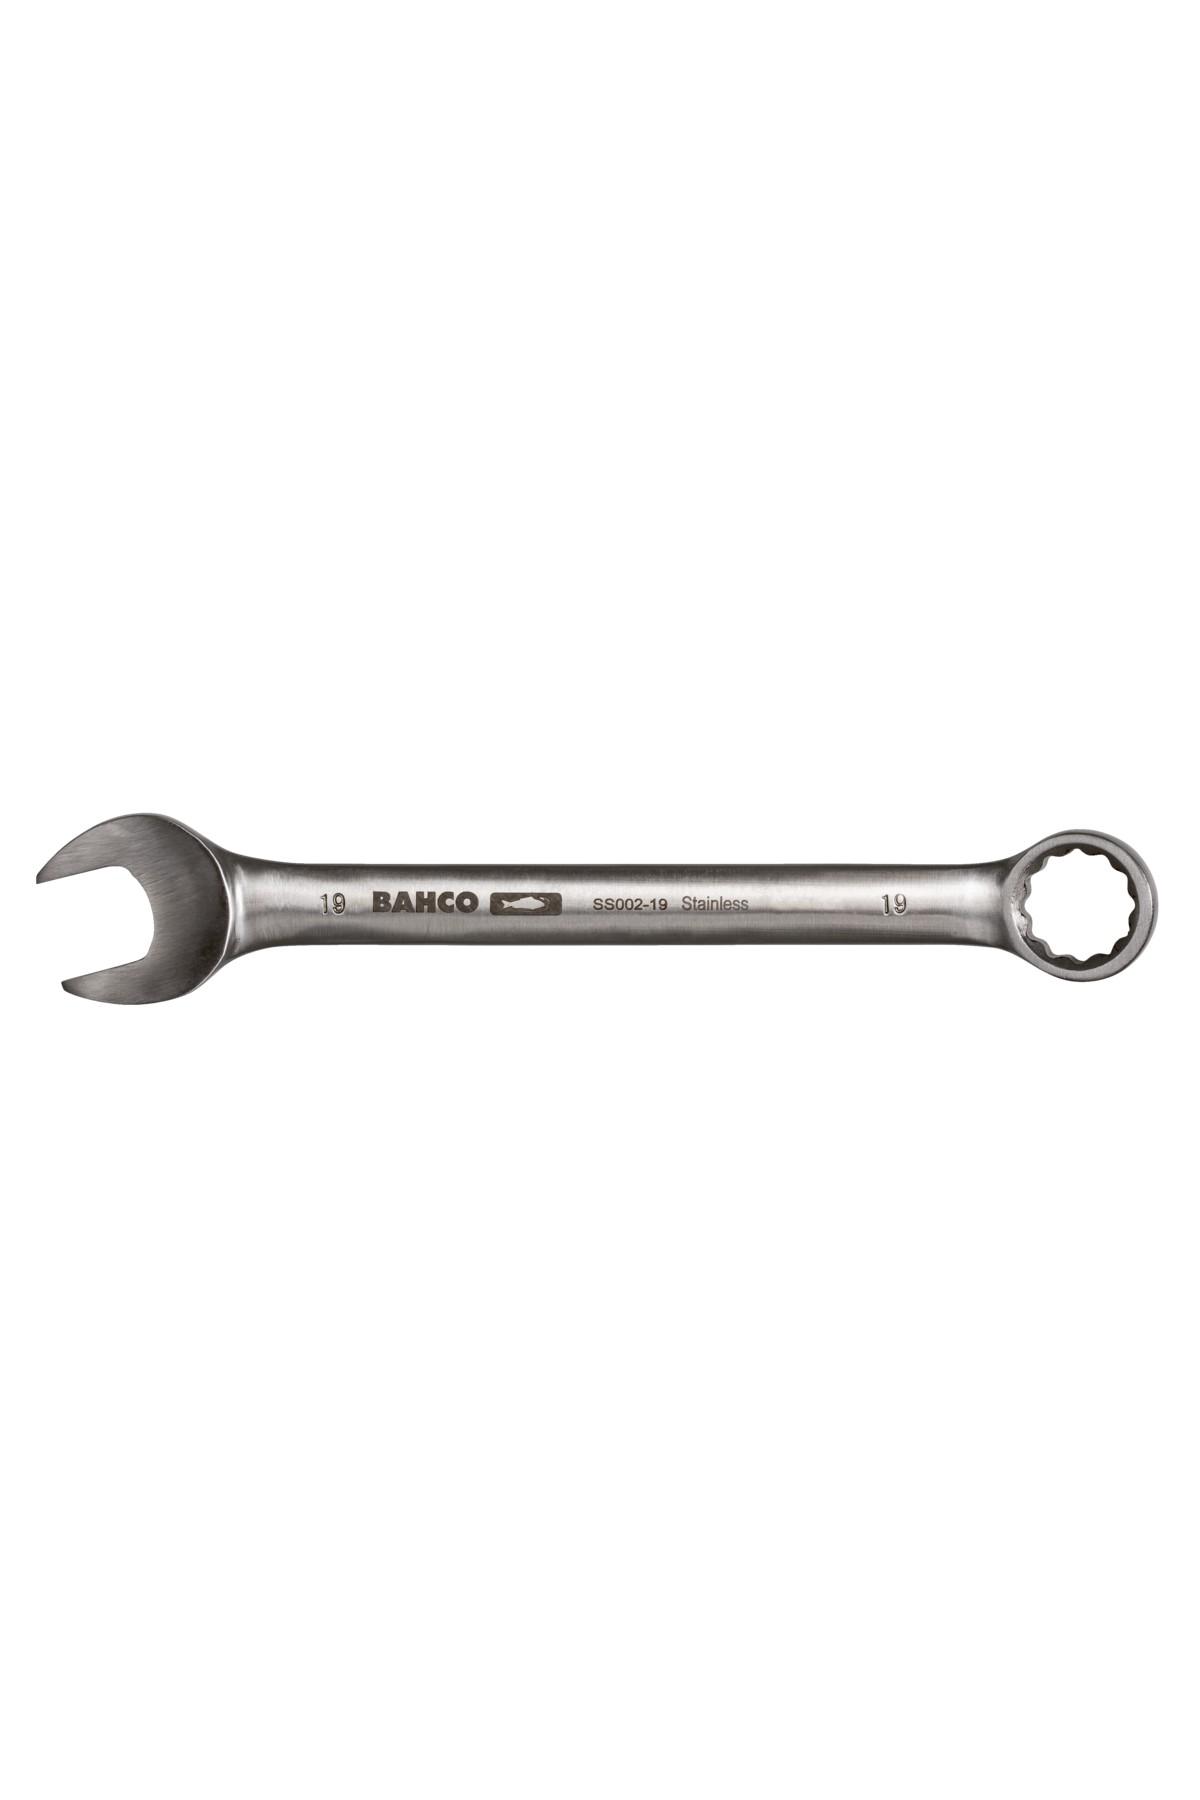 Ring spanner stainless 17mm